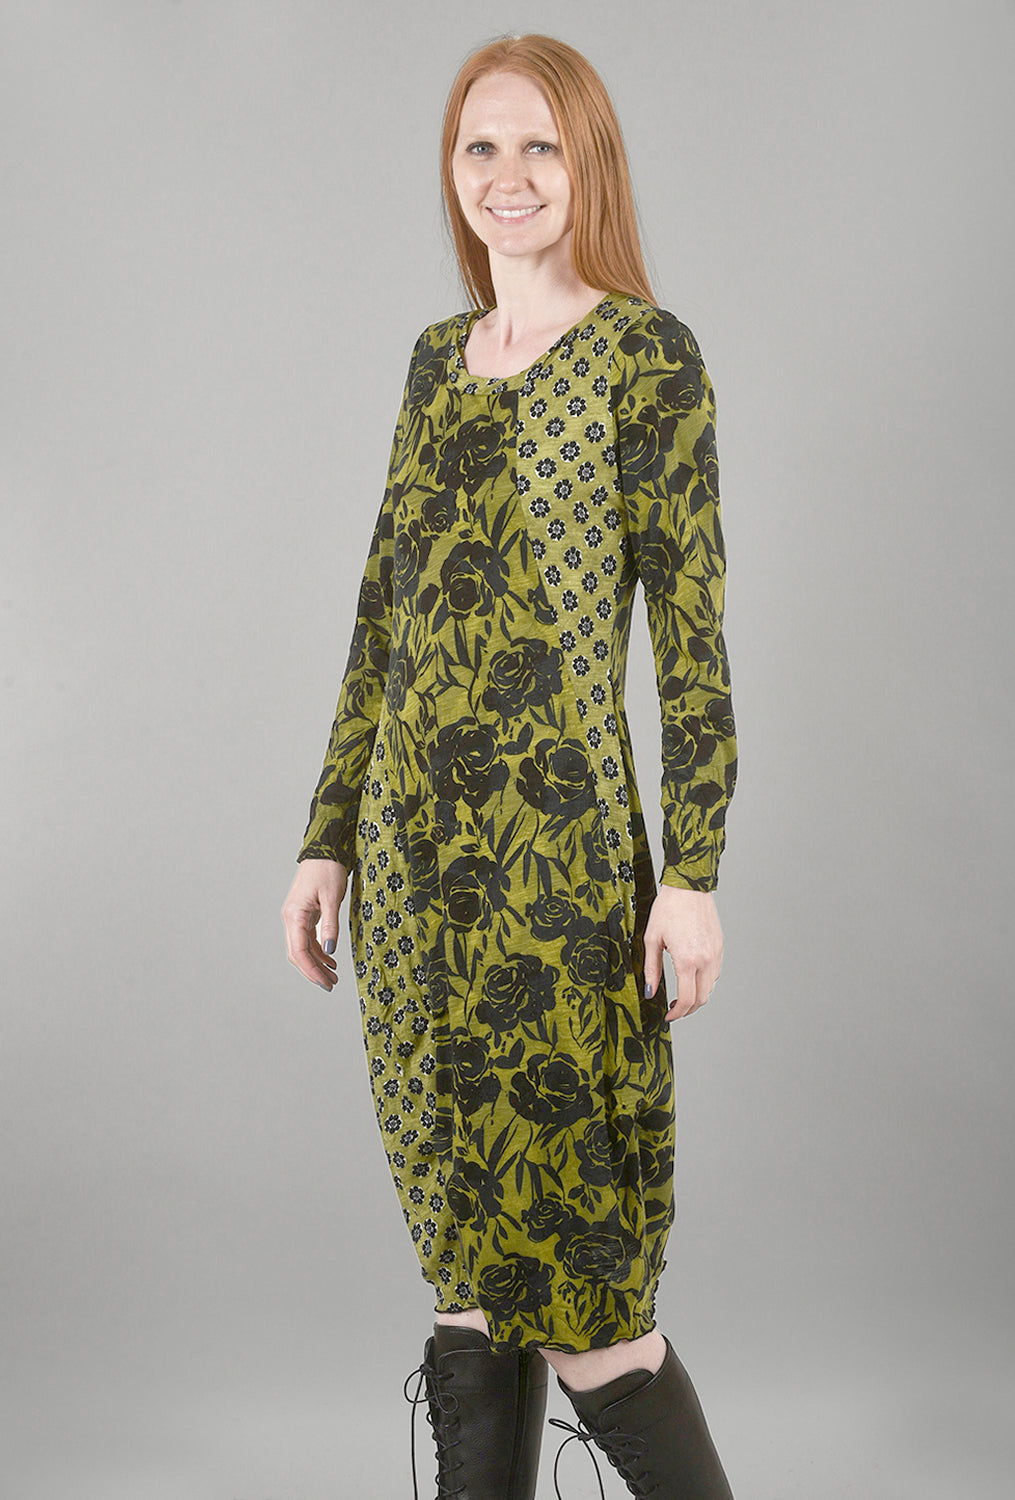 Floral FX Anytime Dress, Moss